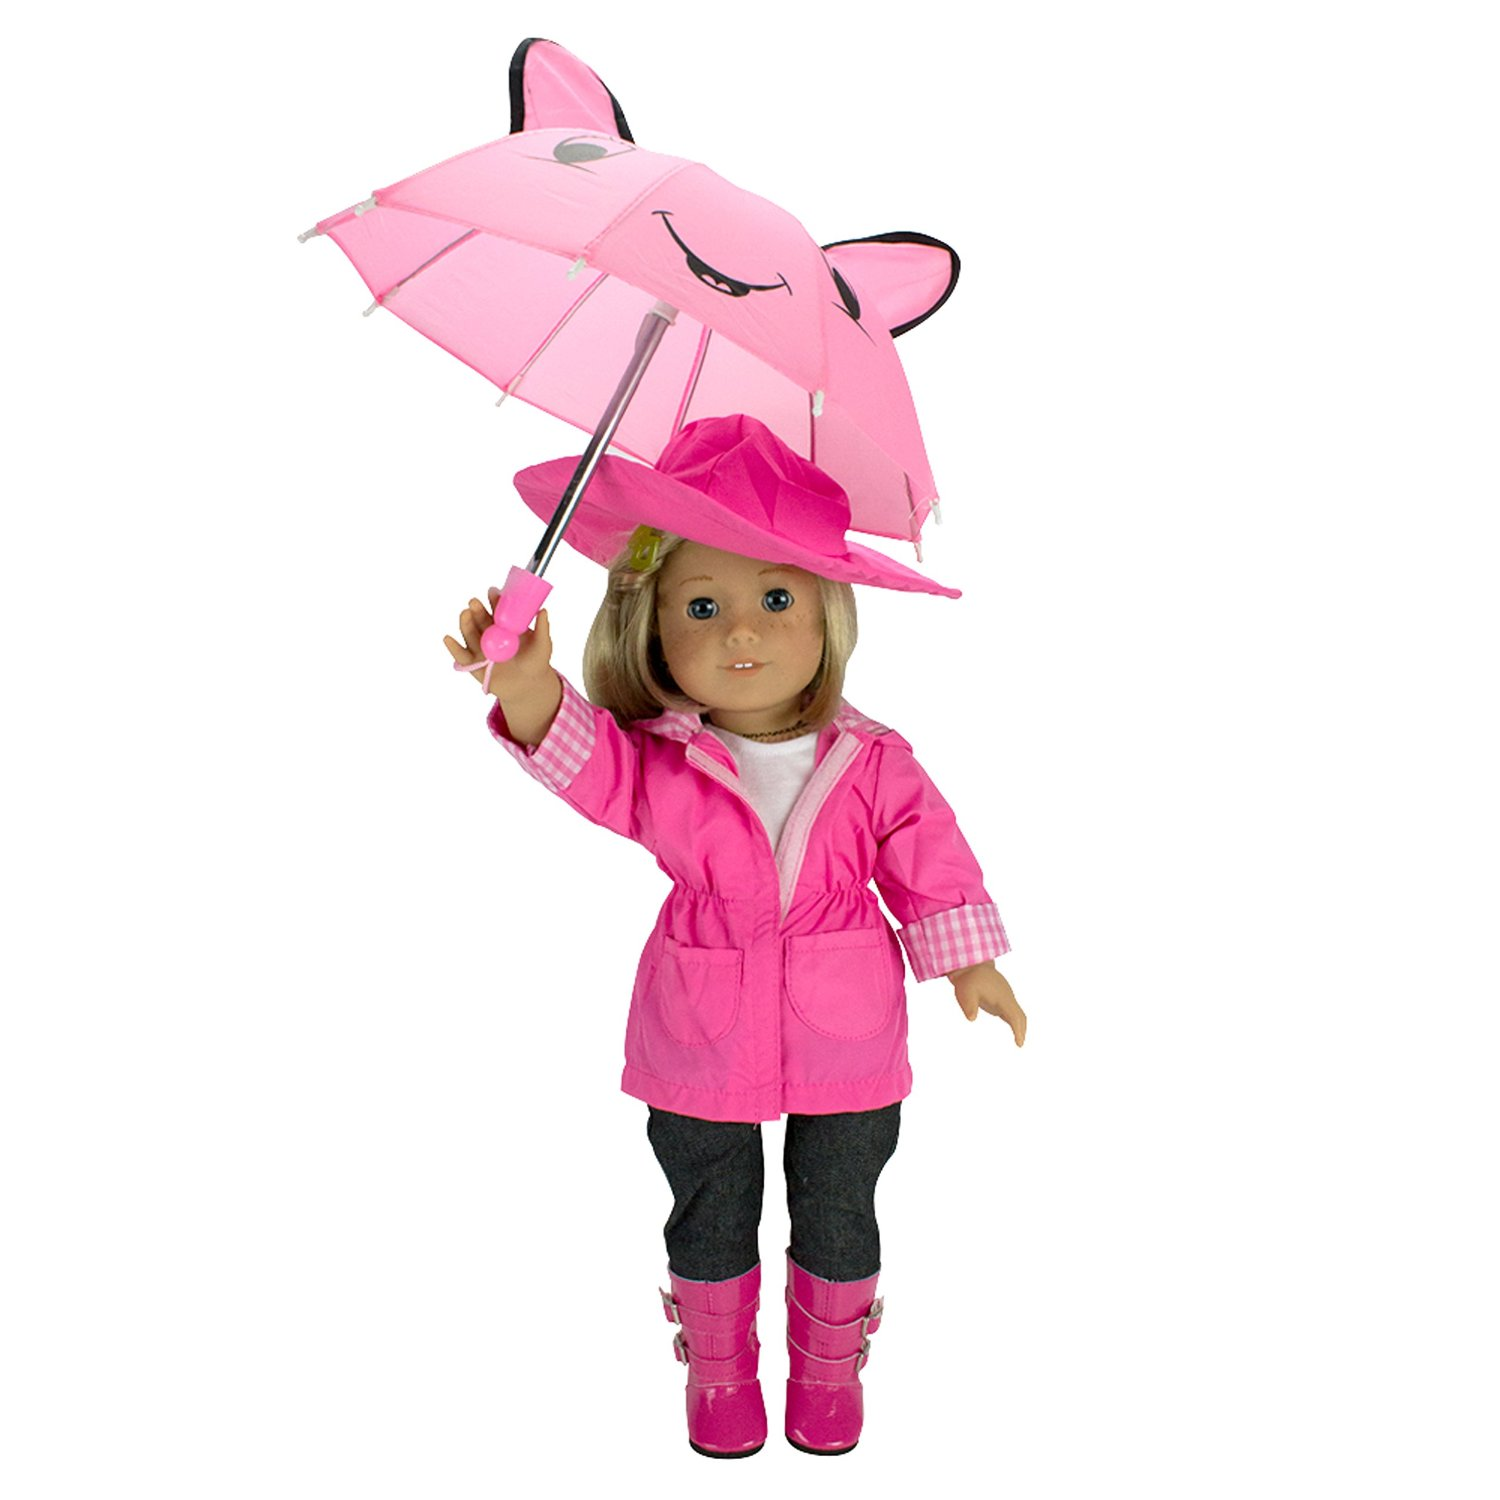 Rain Coat Doll Clothes for American Girl Dolls (Or Any 18″ Doll) Just $18.95 on Amazon!